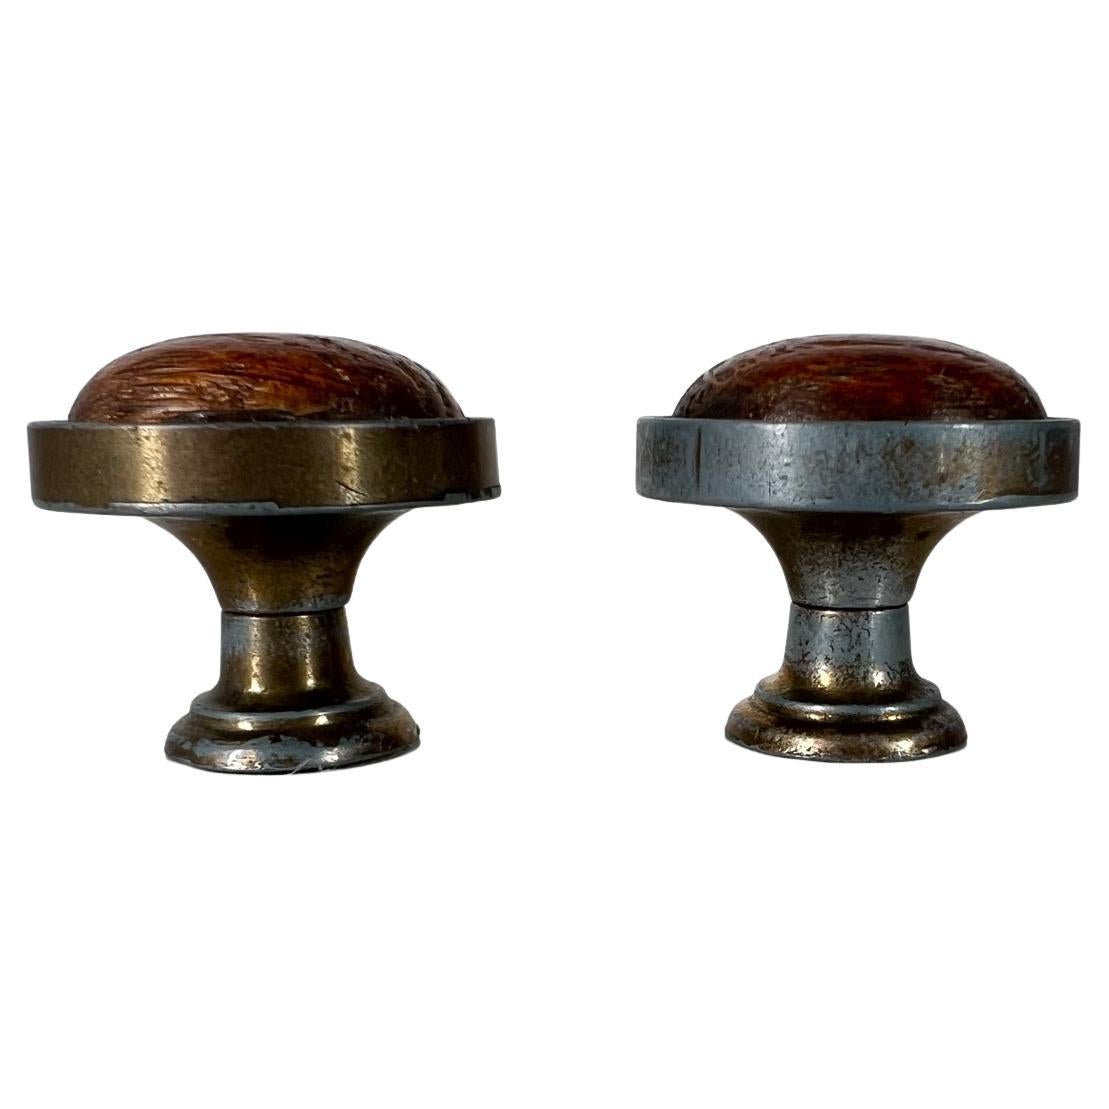 Vintage Hardware Drawer Pulls Brass Knobs with Wood Insert Set of 2 Canada For Sale